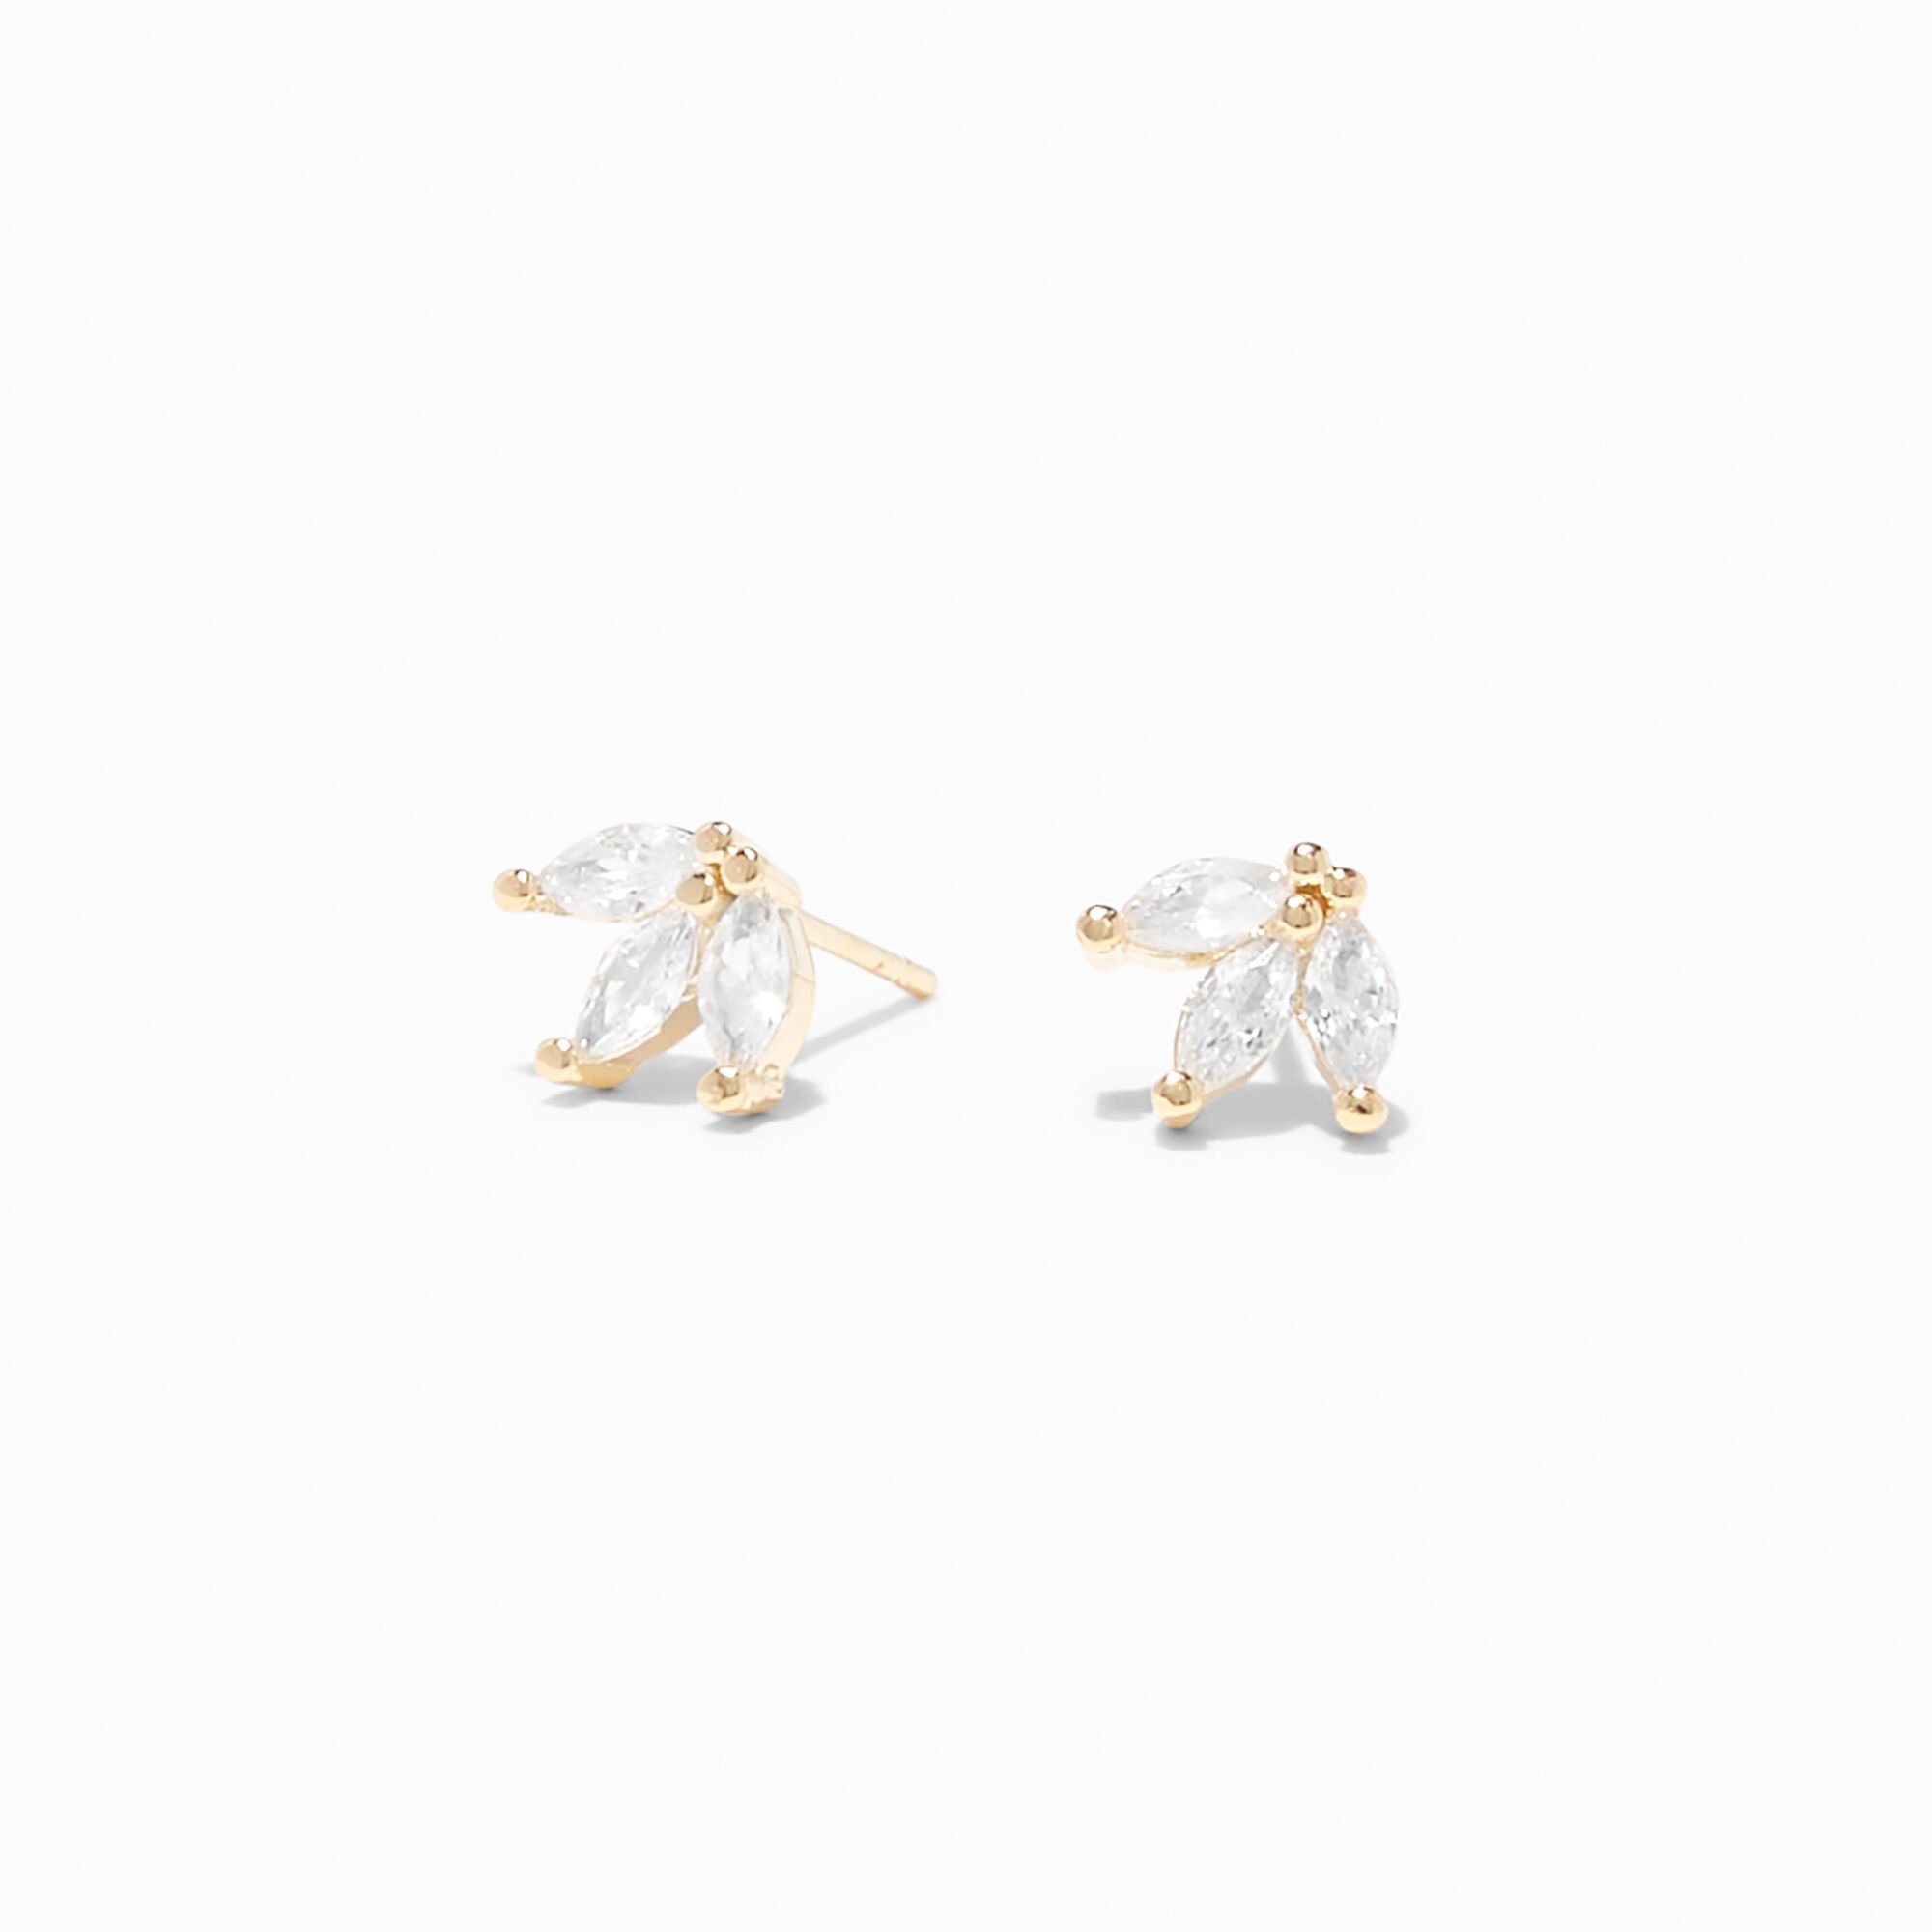 View Claires Tone Cubic Zirconia Lotus Stud Earrings Gold information